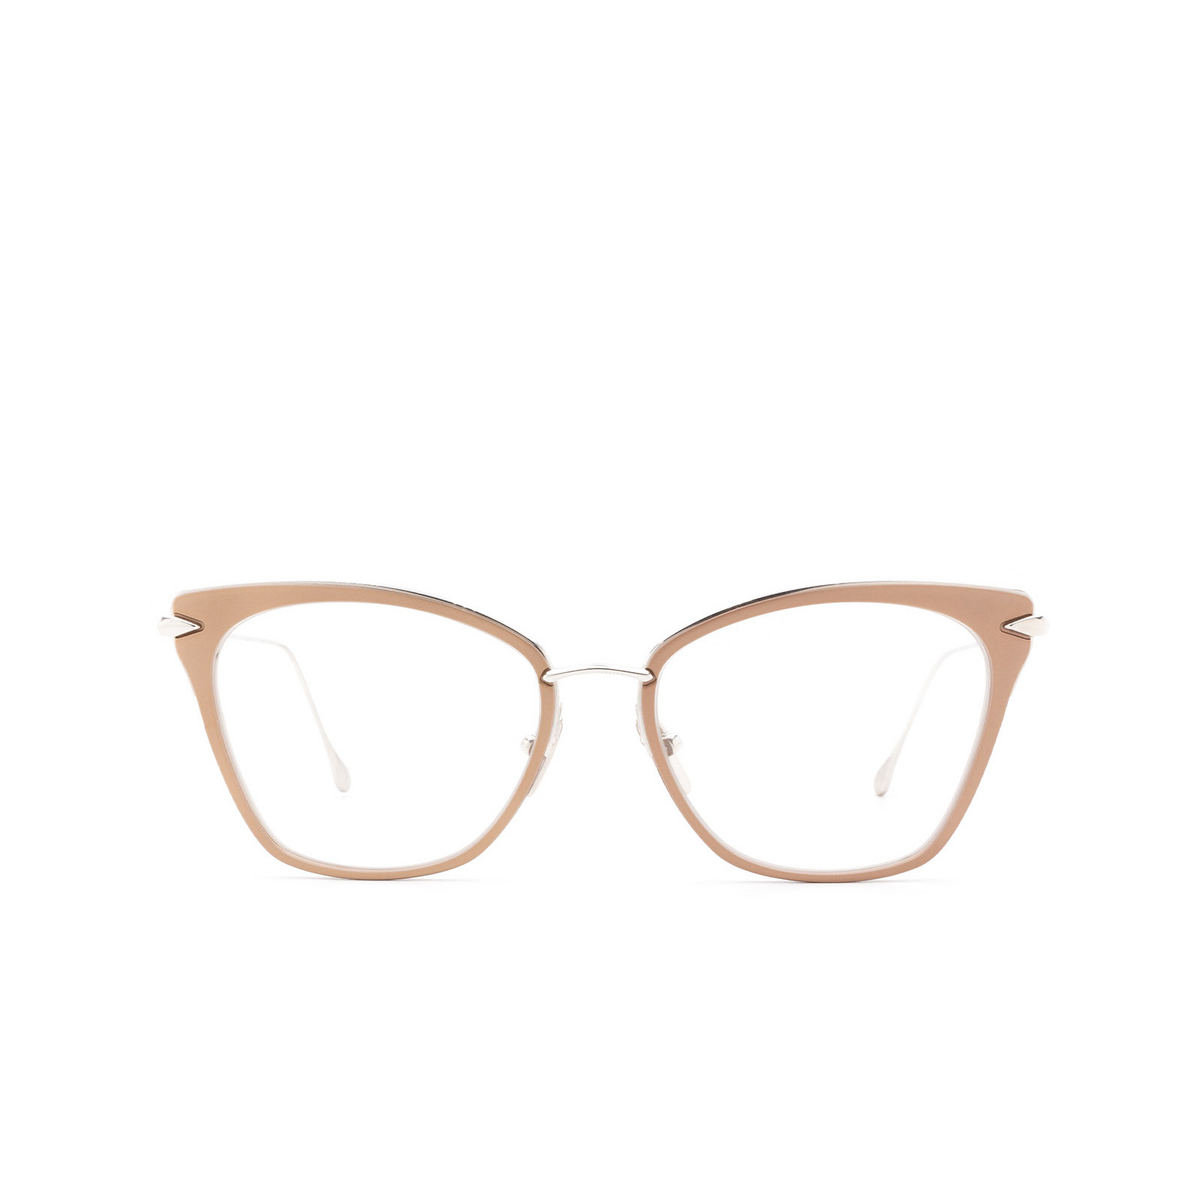 Dita® Butterfly Eyeglasses: DRX3041 color B-rgd-slv - front view.